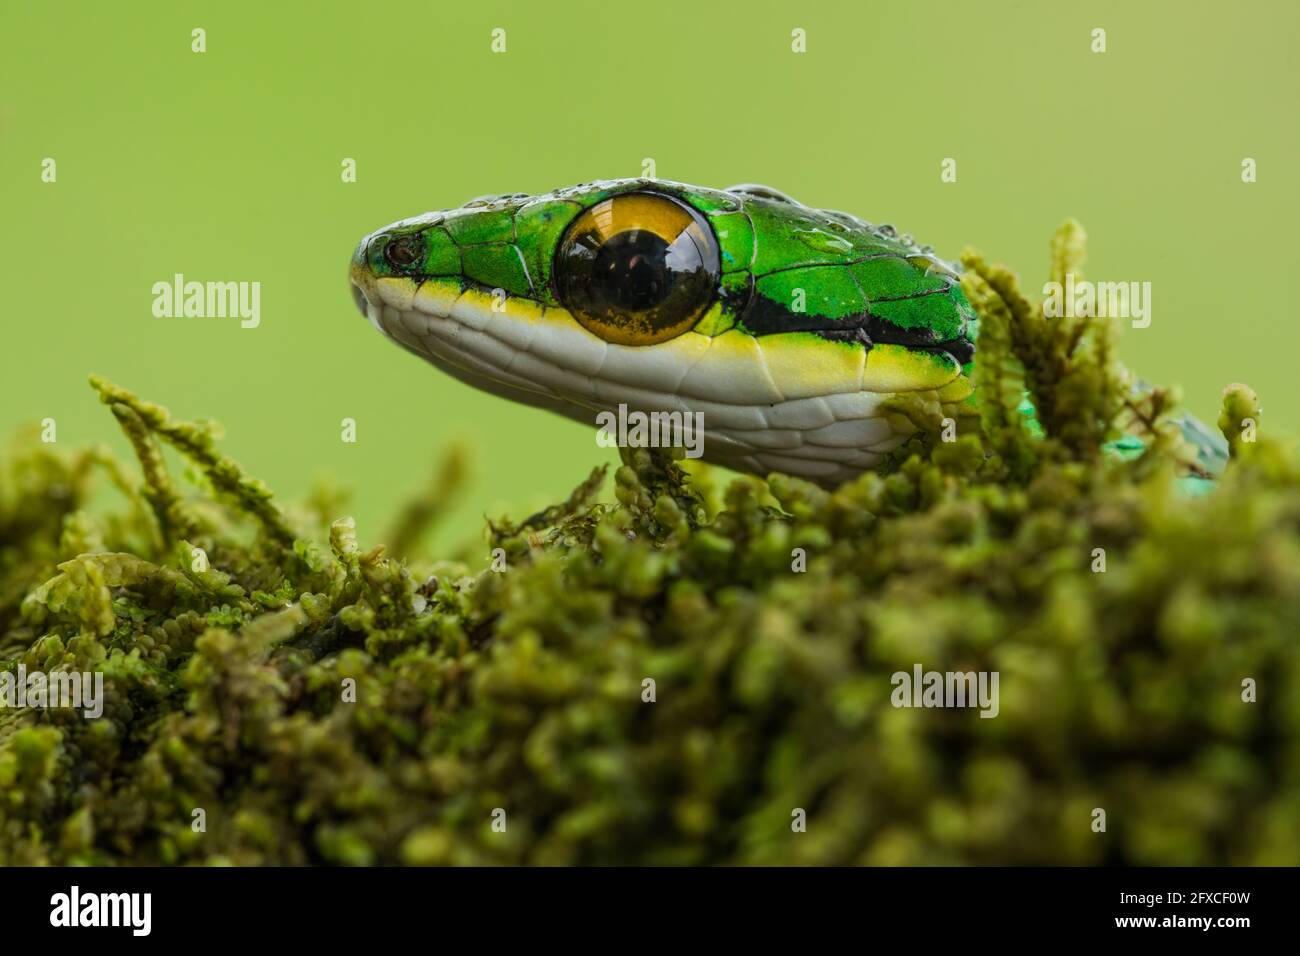 The Satiny Parrot Snake, Leptophis ahaetulla, is an arboreal snake found in Central & South America. Stock Photo